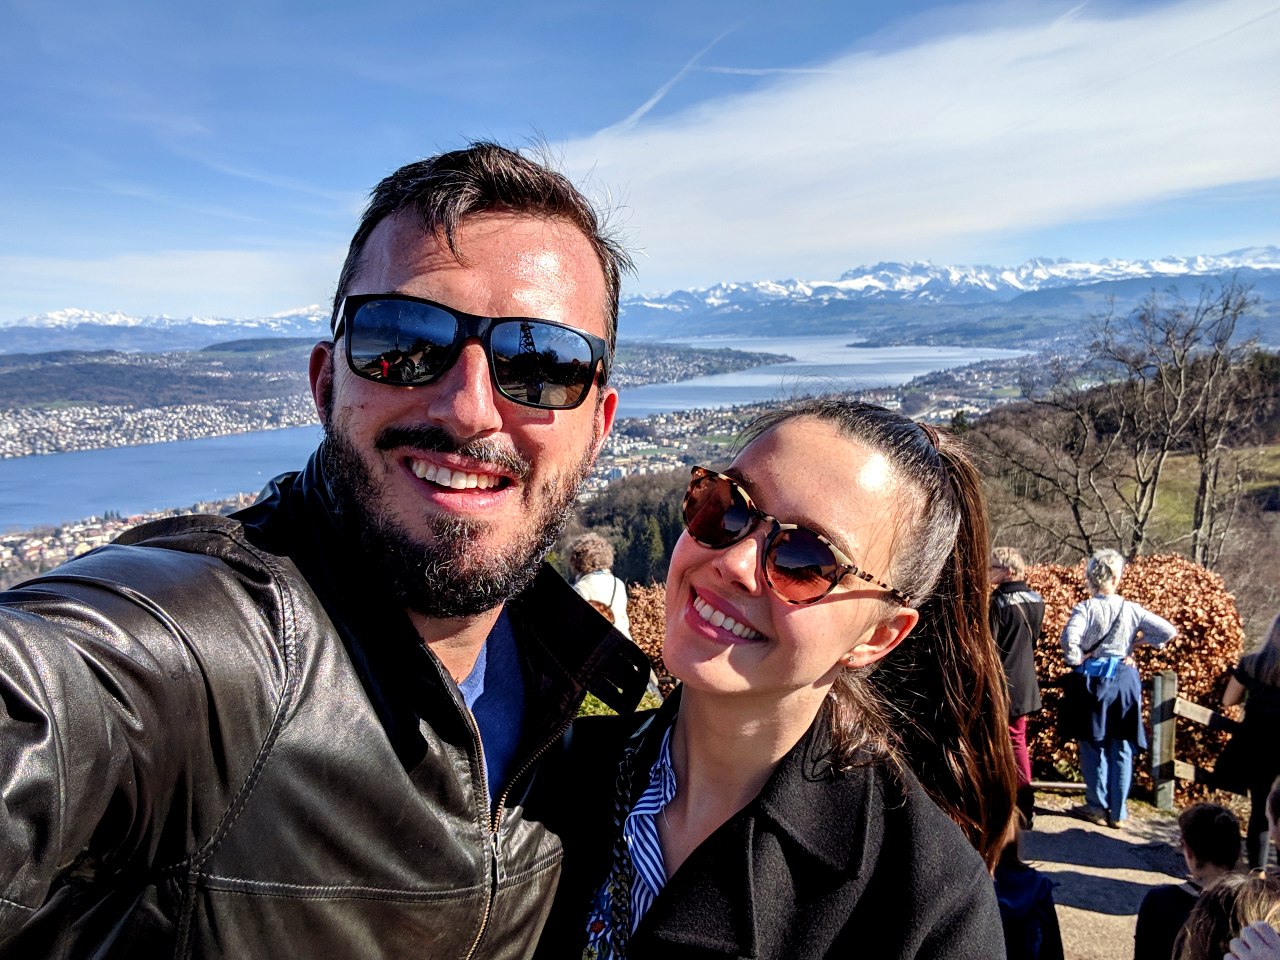 Matthias and Solène on Uetliberg on a sunny spring day. Behind them lake Zurich and the mountains.